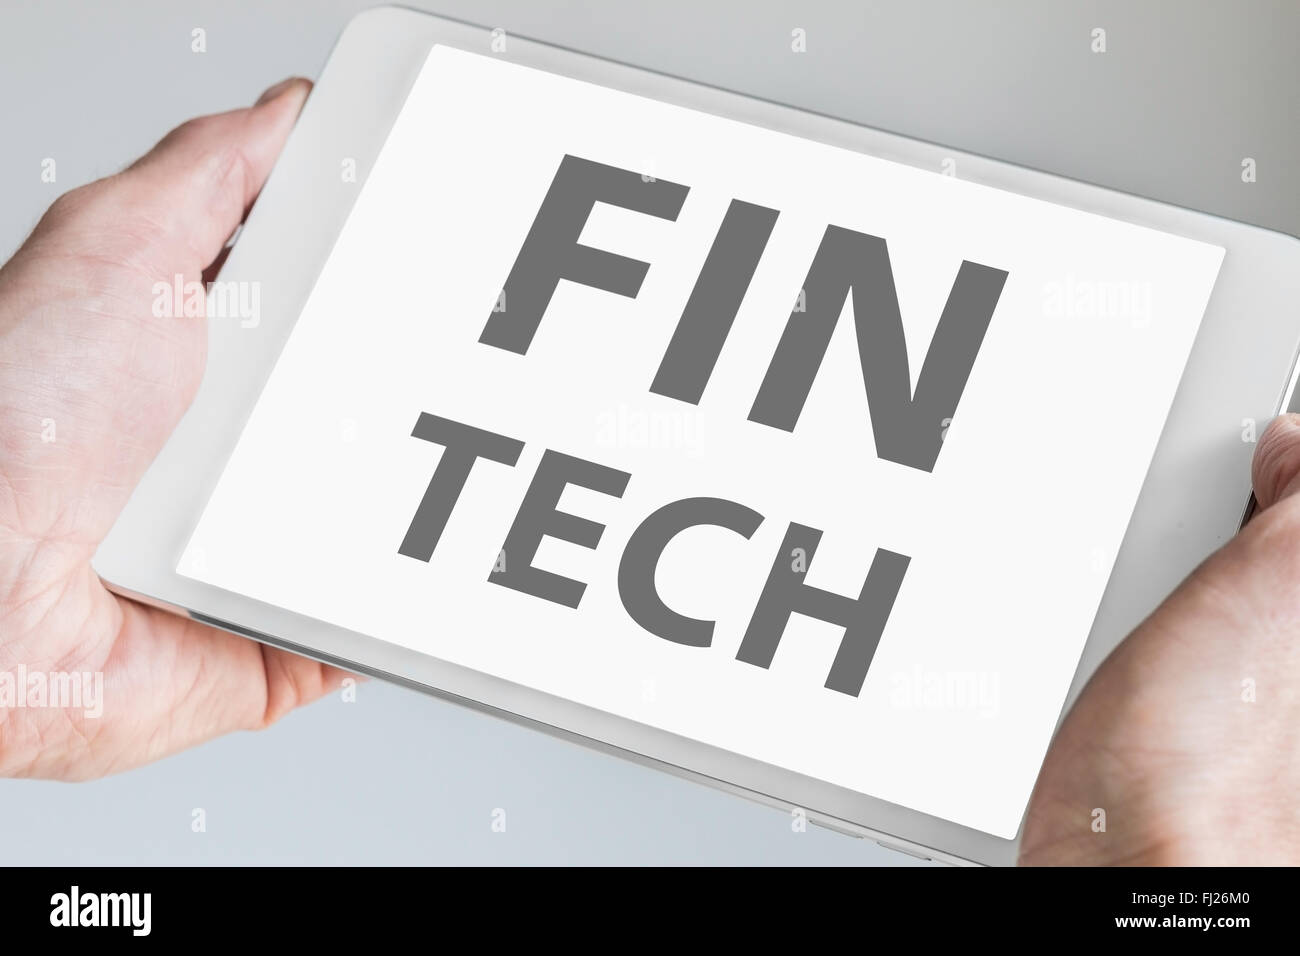 Fin tech text displayed on touchscreen of modern tablet or smart device. Concept of financial technology startup company. Stock Photo